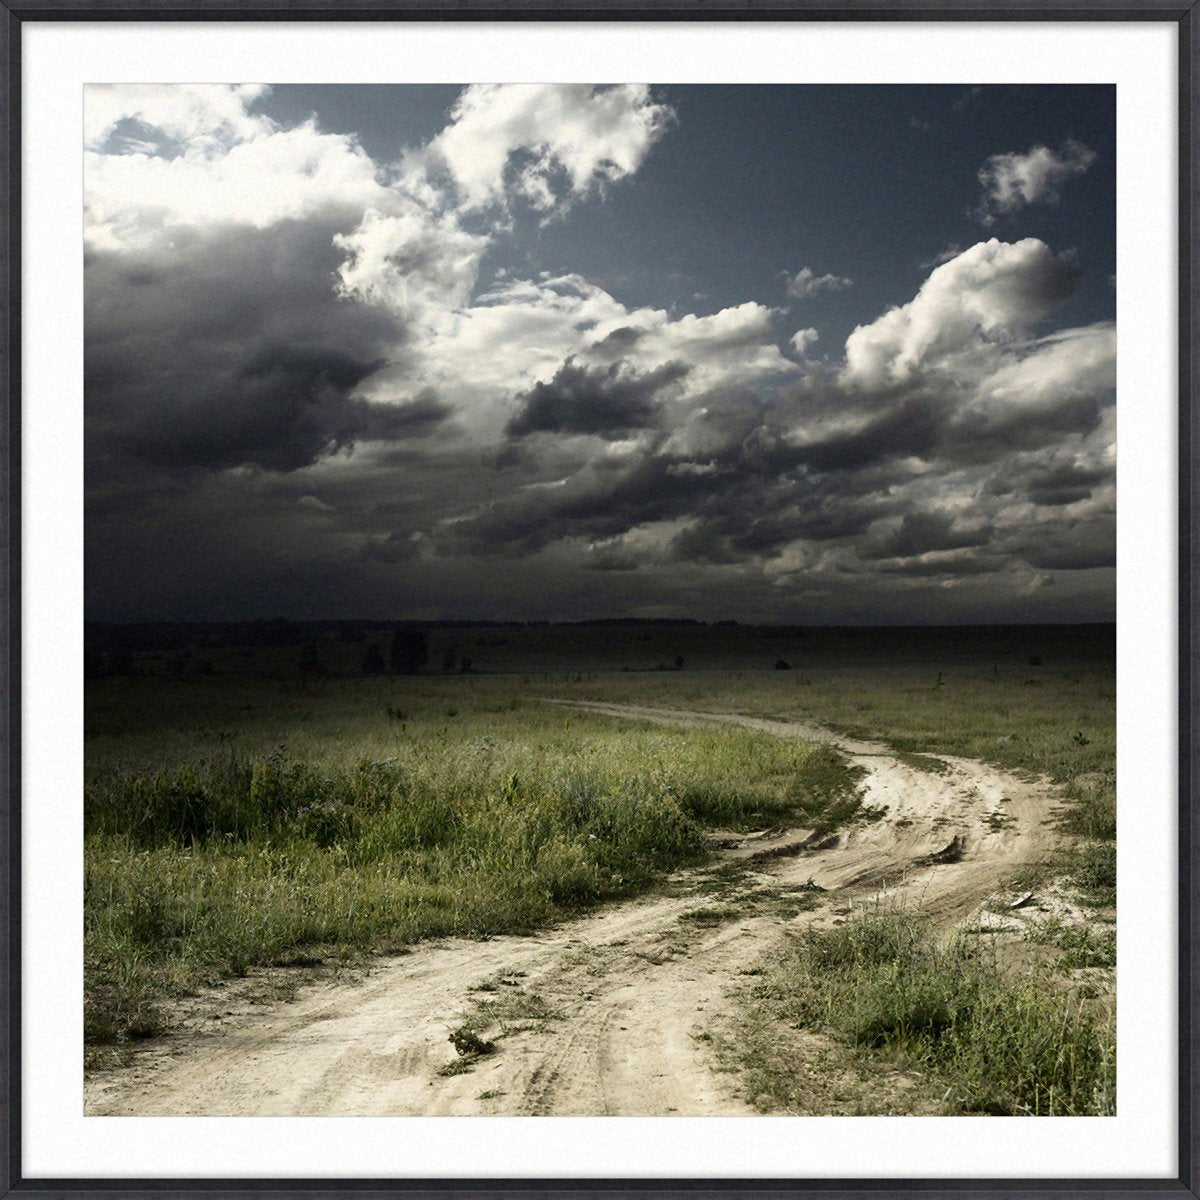 Road In Field With Stormy Clouds